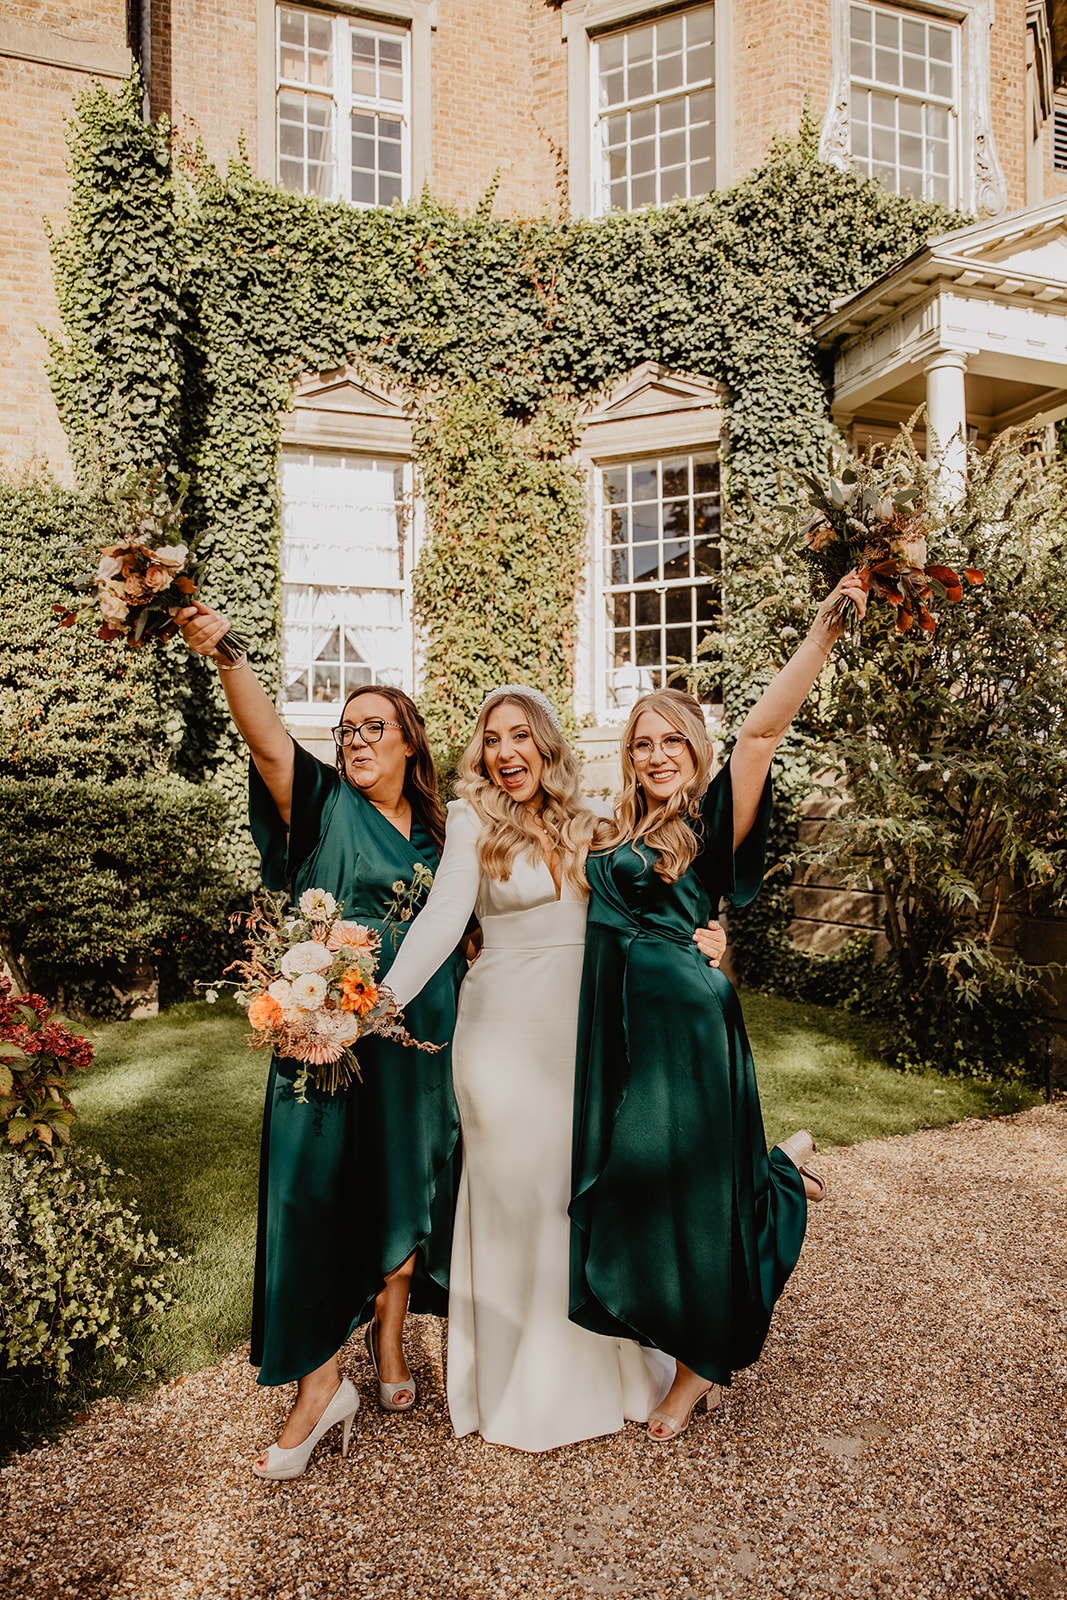 Bride and bridesmaids at a Hampton Court House Wedding. By Olive Joy Photography